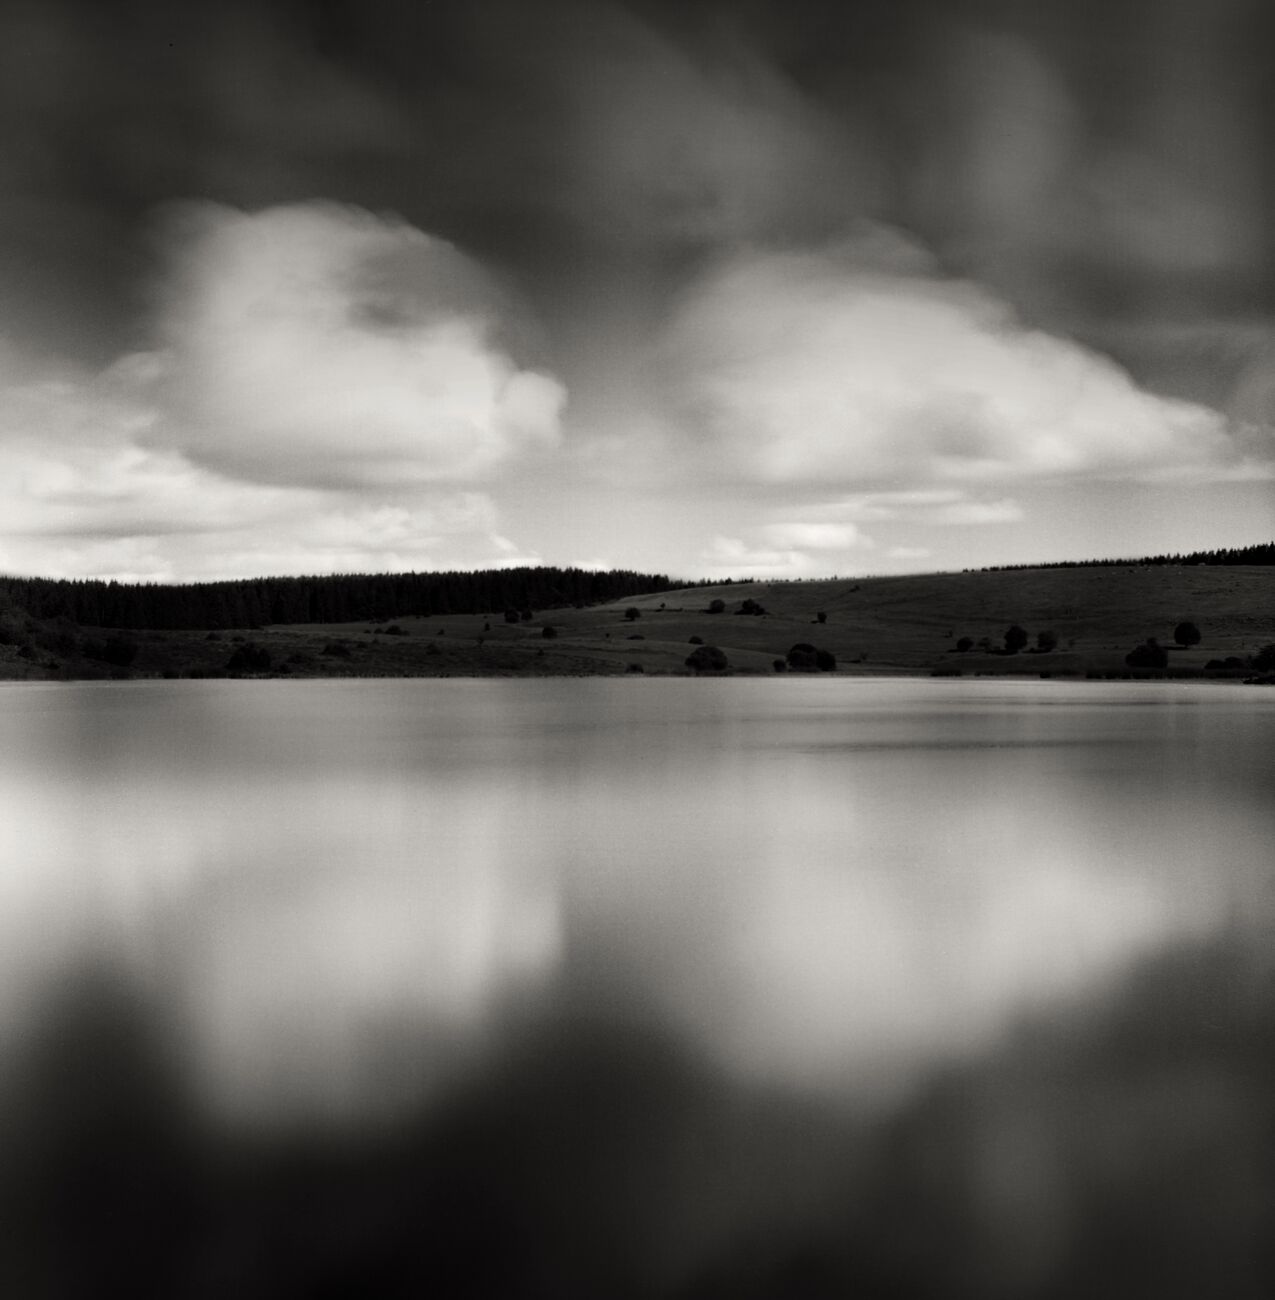 Reflecting Clouds, Sauvages Lake, France. August 2020. Ref-1422 - Denis Olivier Art Photography